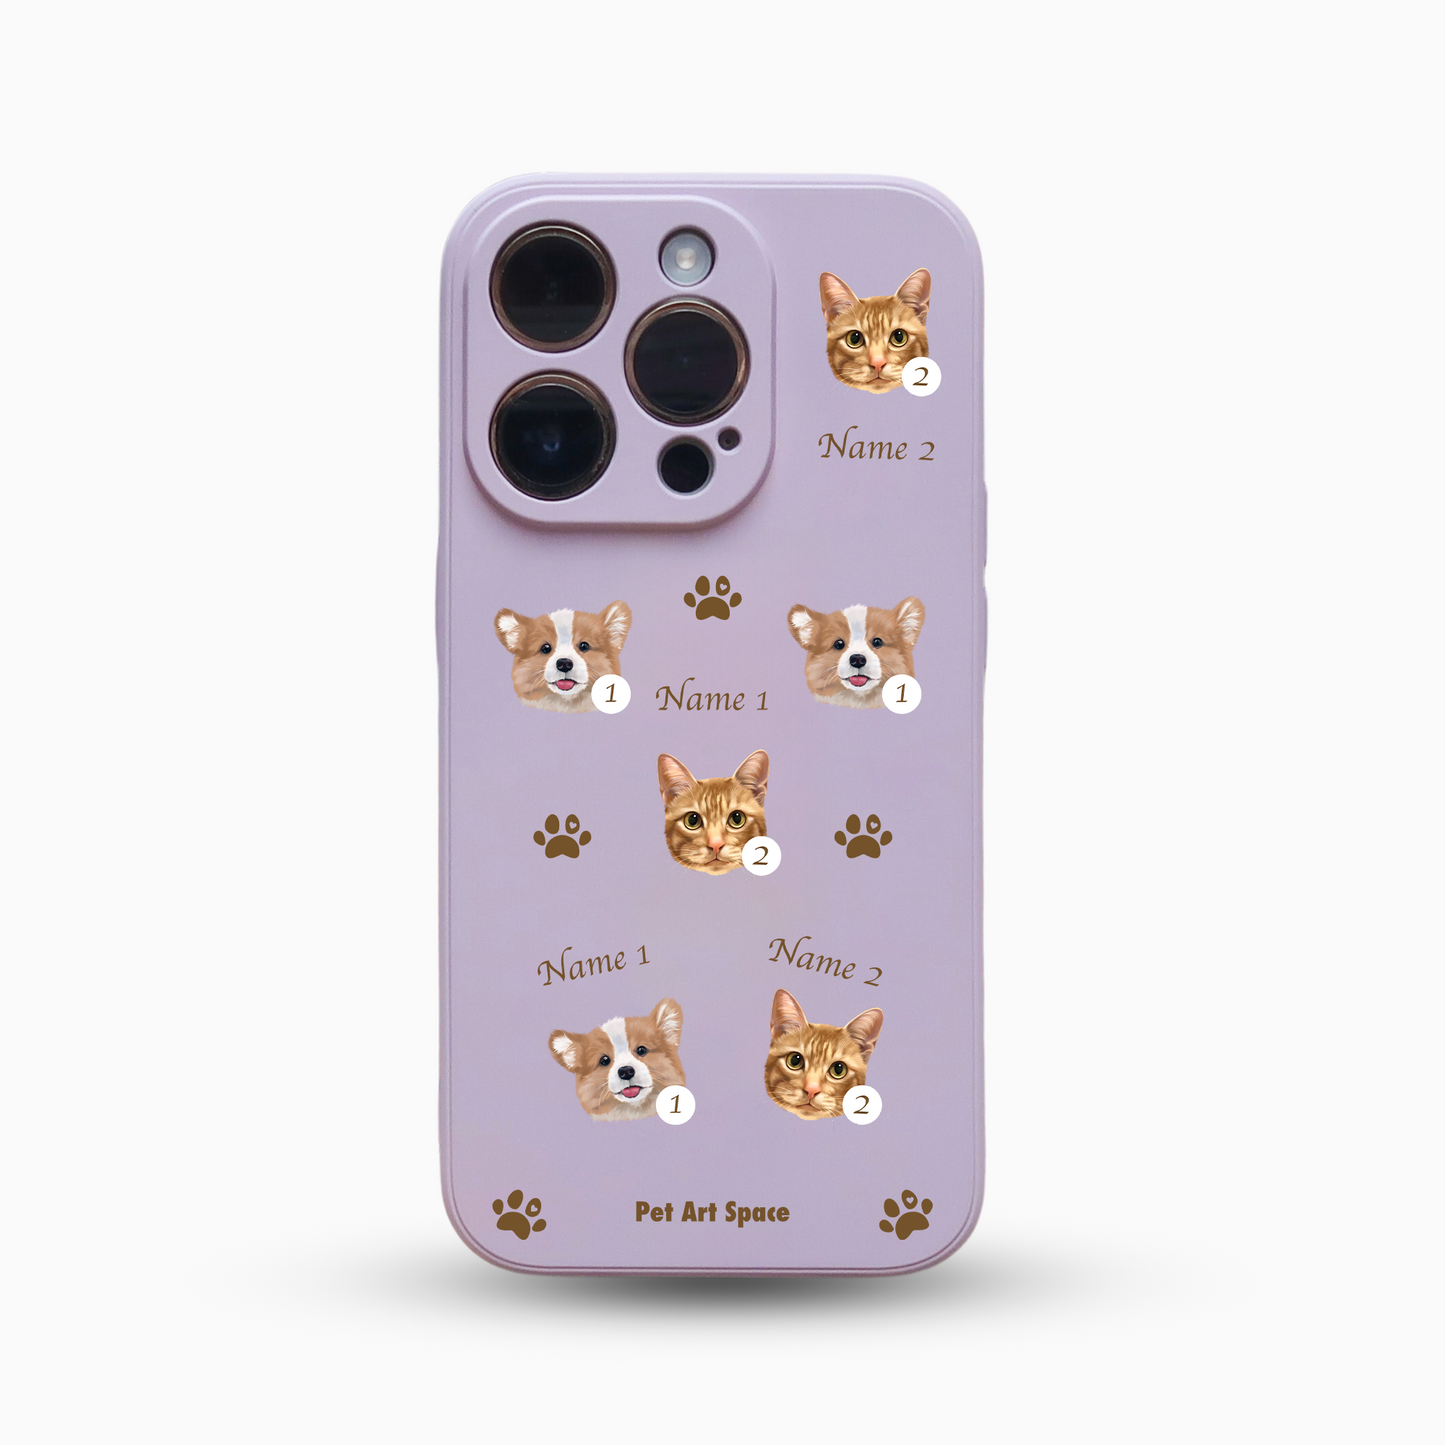 Paws A for 2 Pets - Silicone Case - Lavender